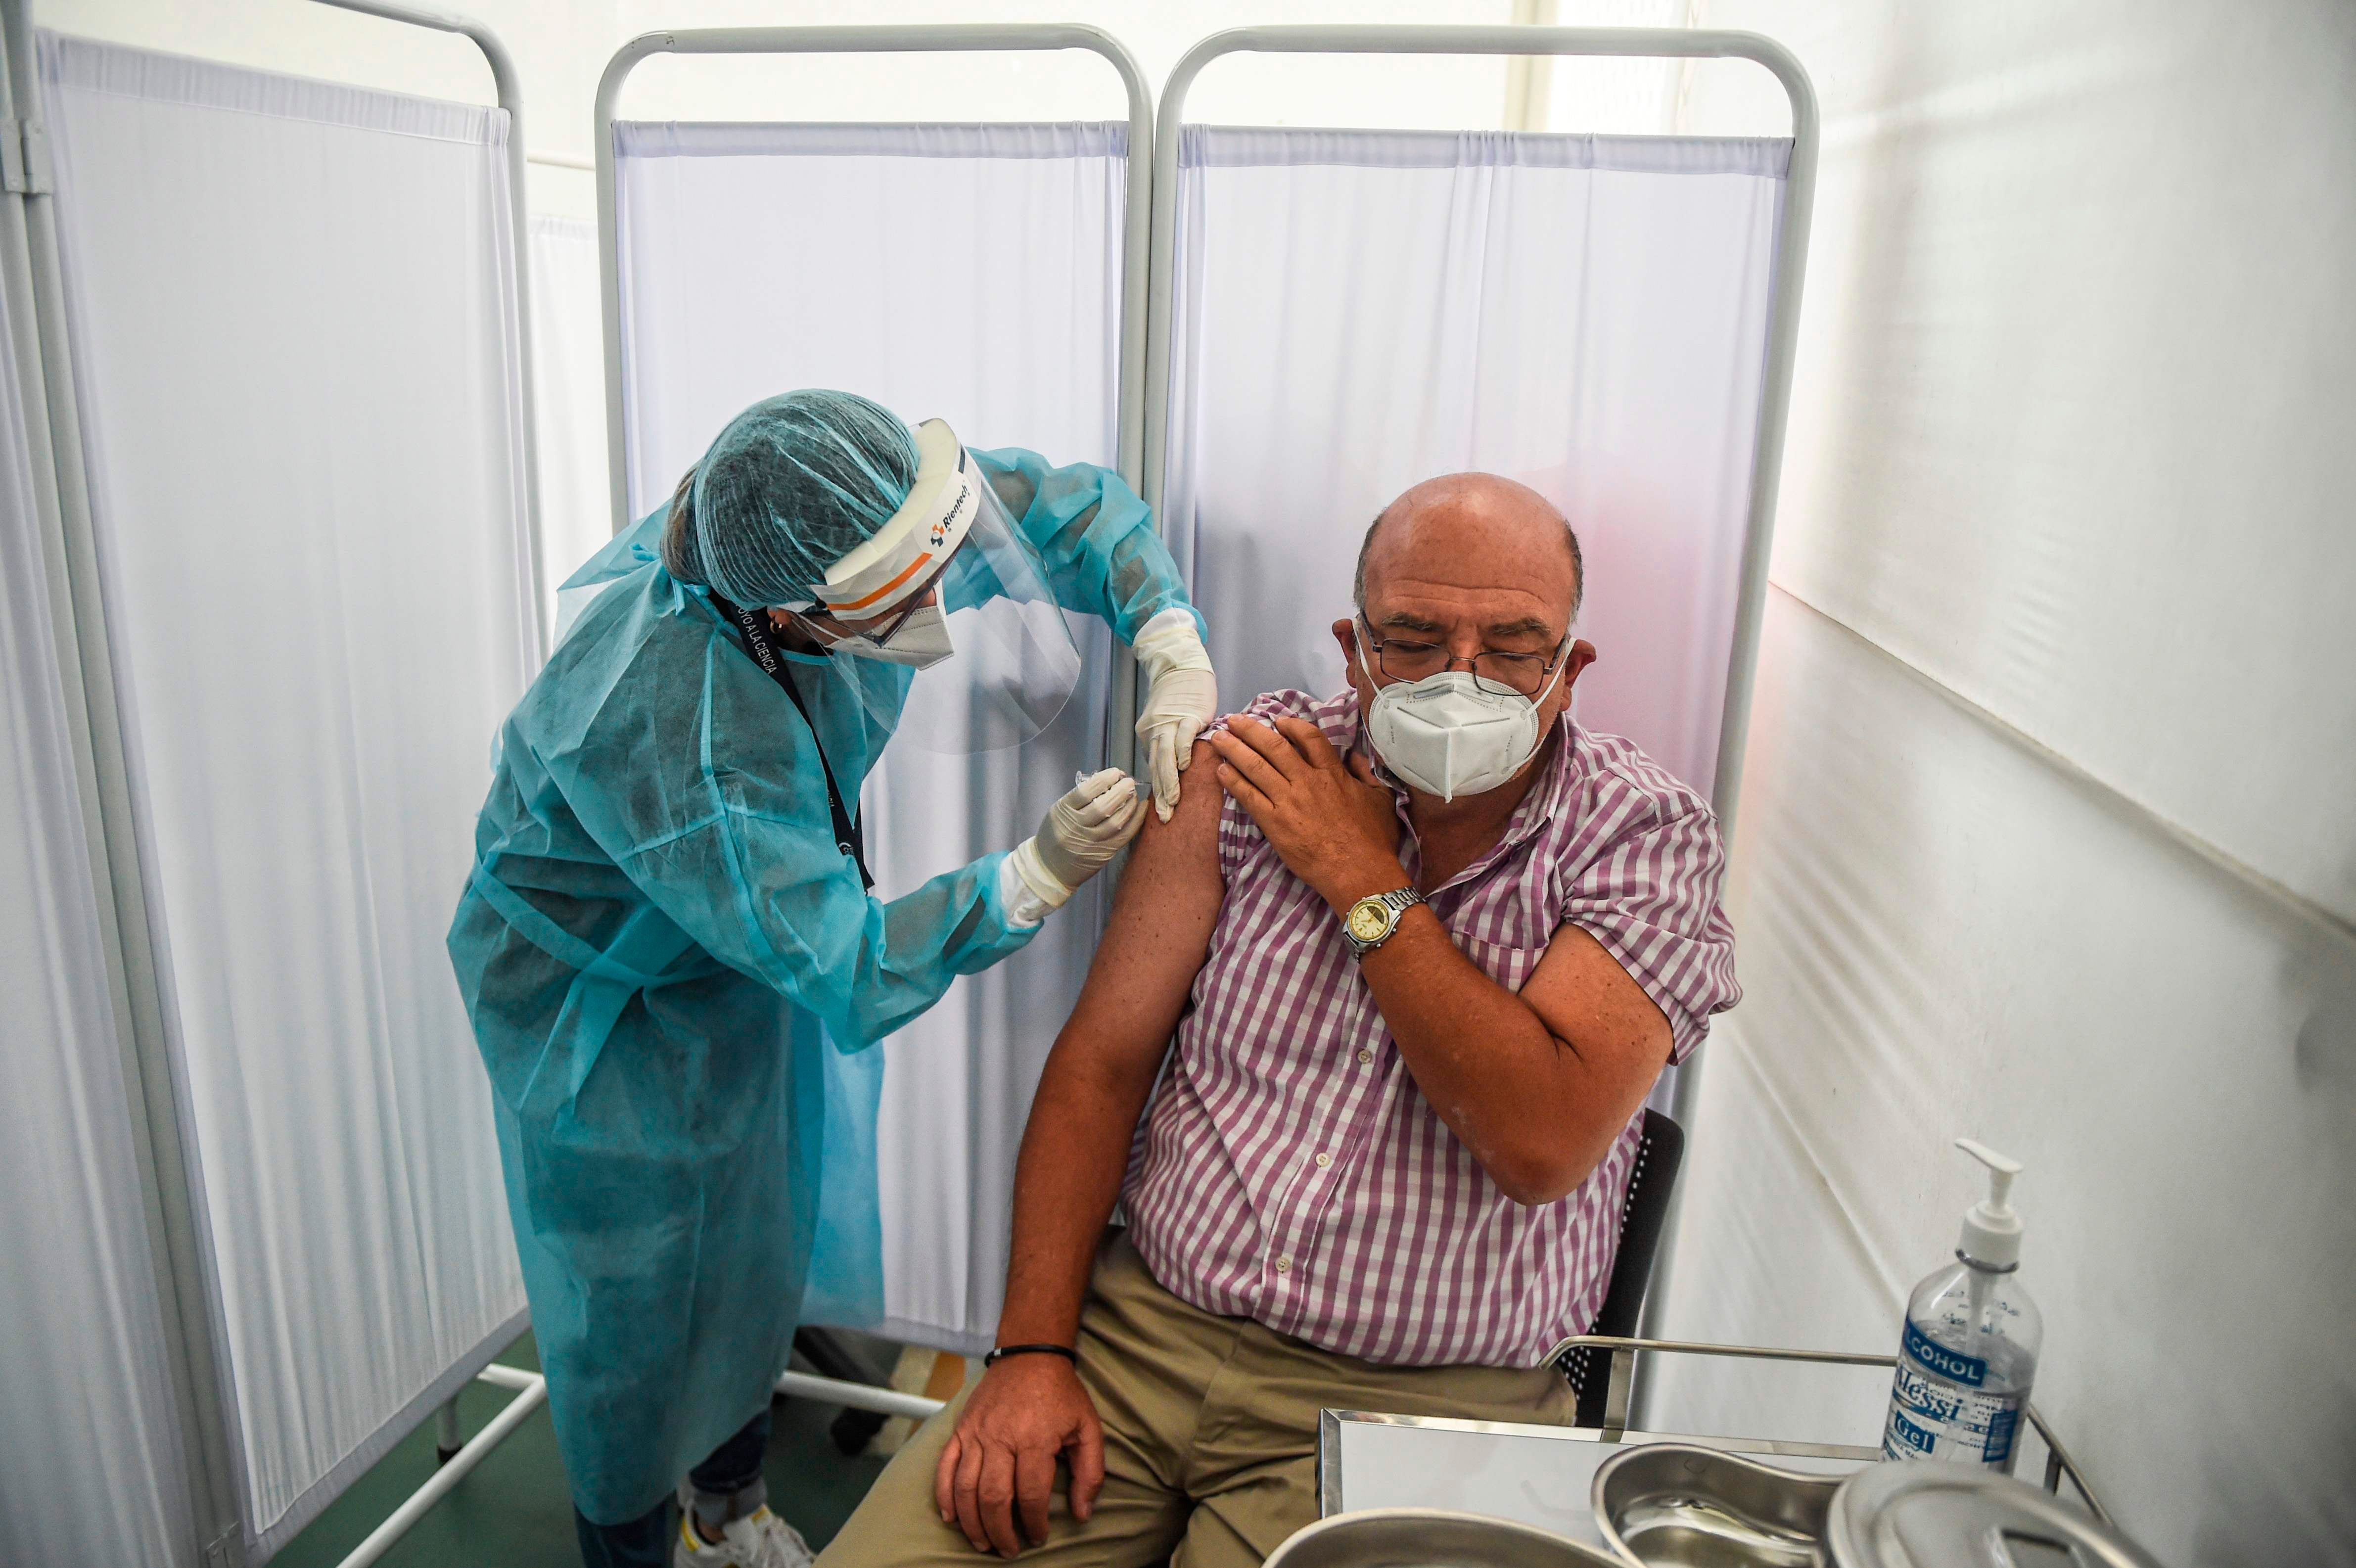 A health worker inoculates a volunteer with a Covid-19 vaccine developed by Sinopharm during its trial in Peru